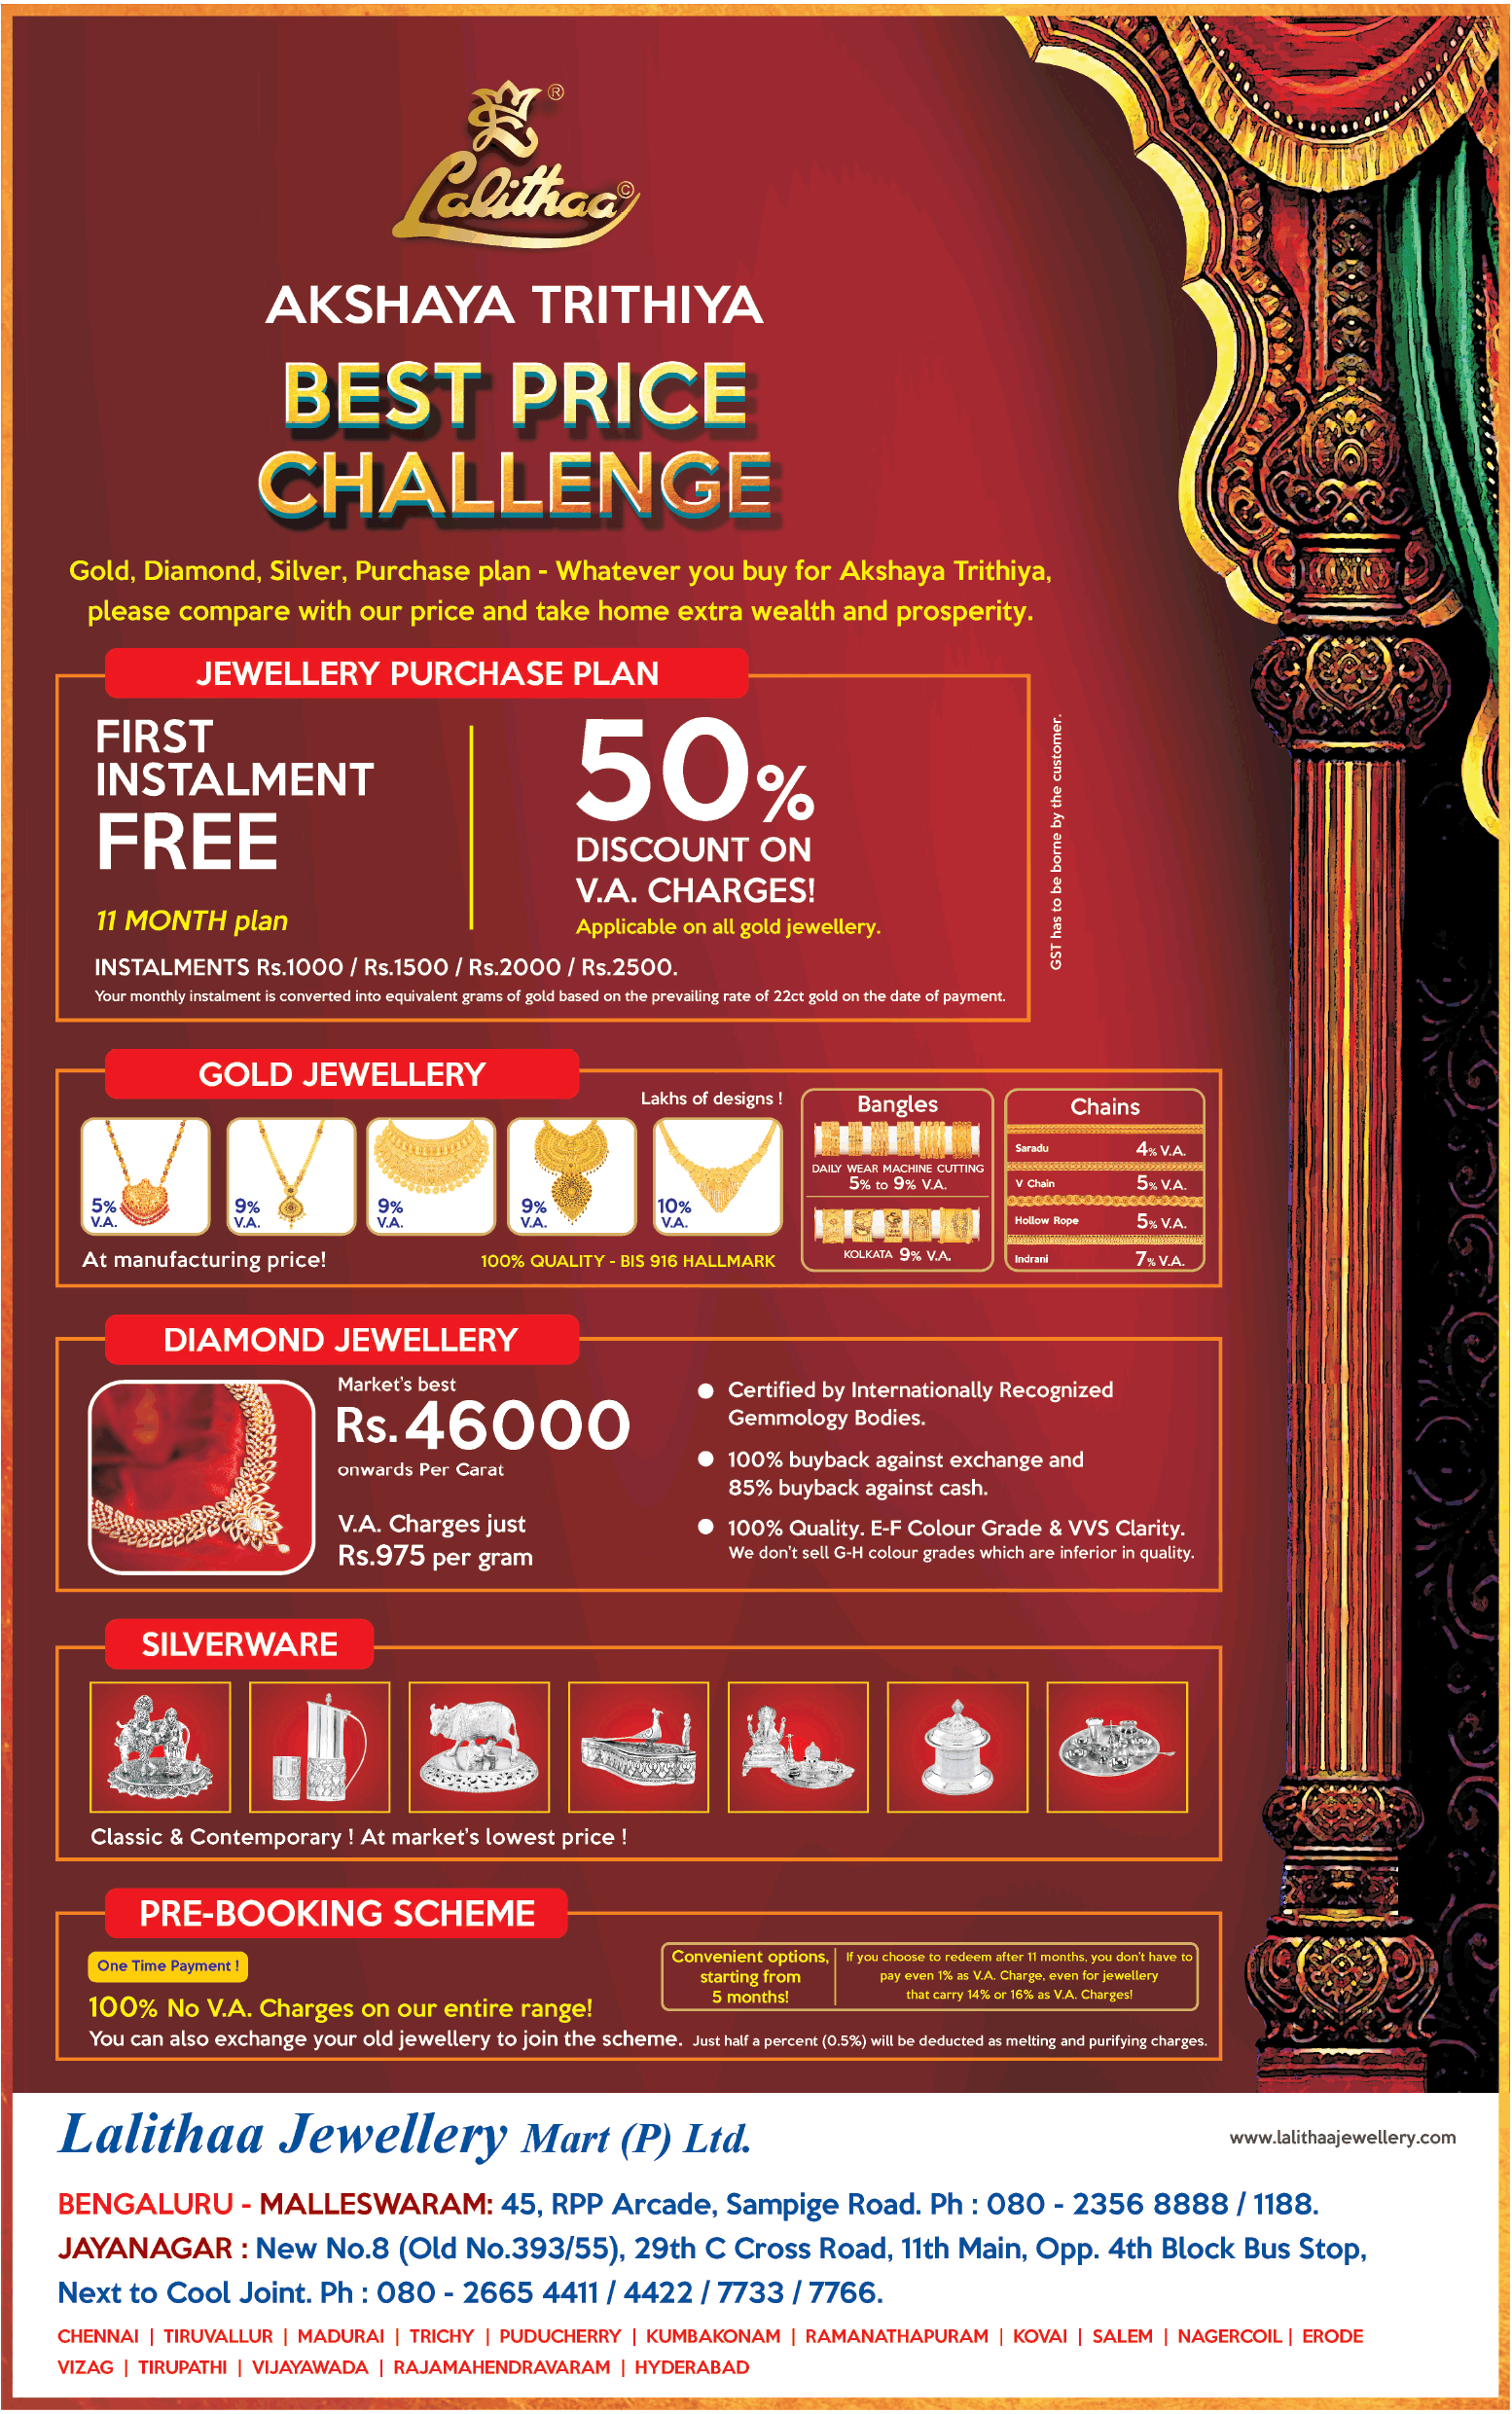 lalithaa-jewellers-akshaya-trithiya-best-price-challenge-first-installment-free-ad-times-of-india-bangalore-26-04-2019.png